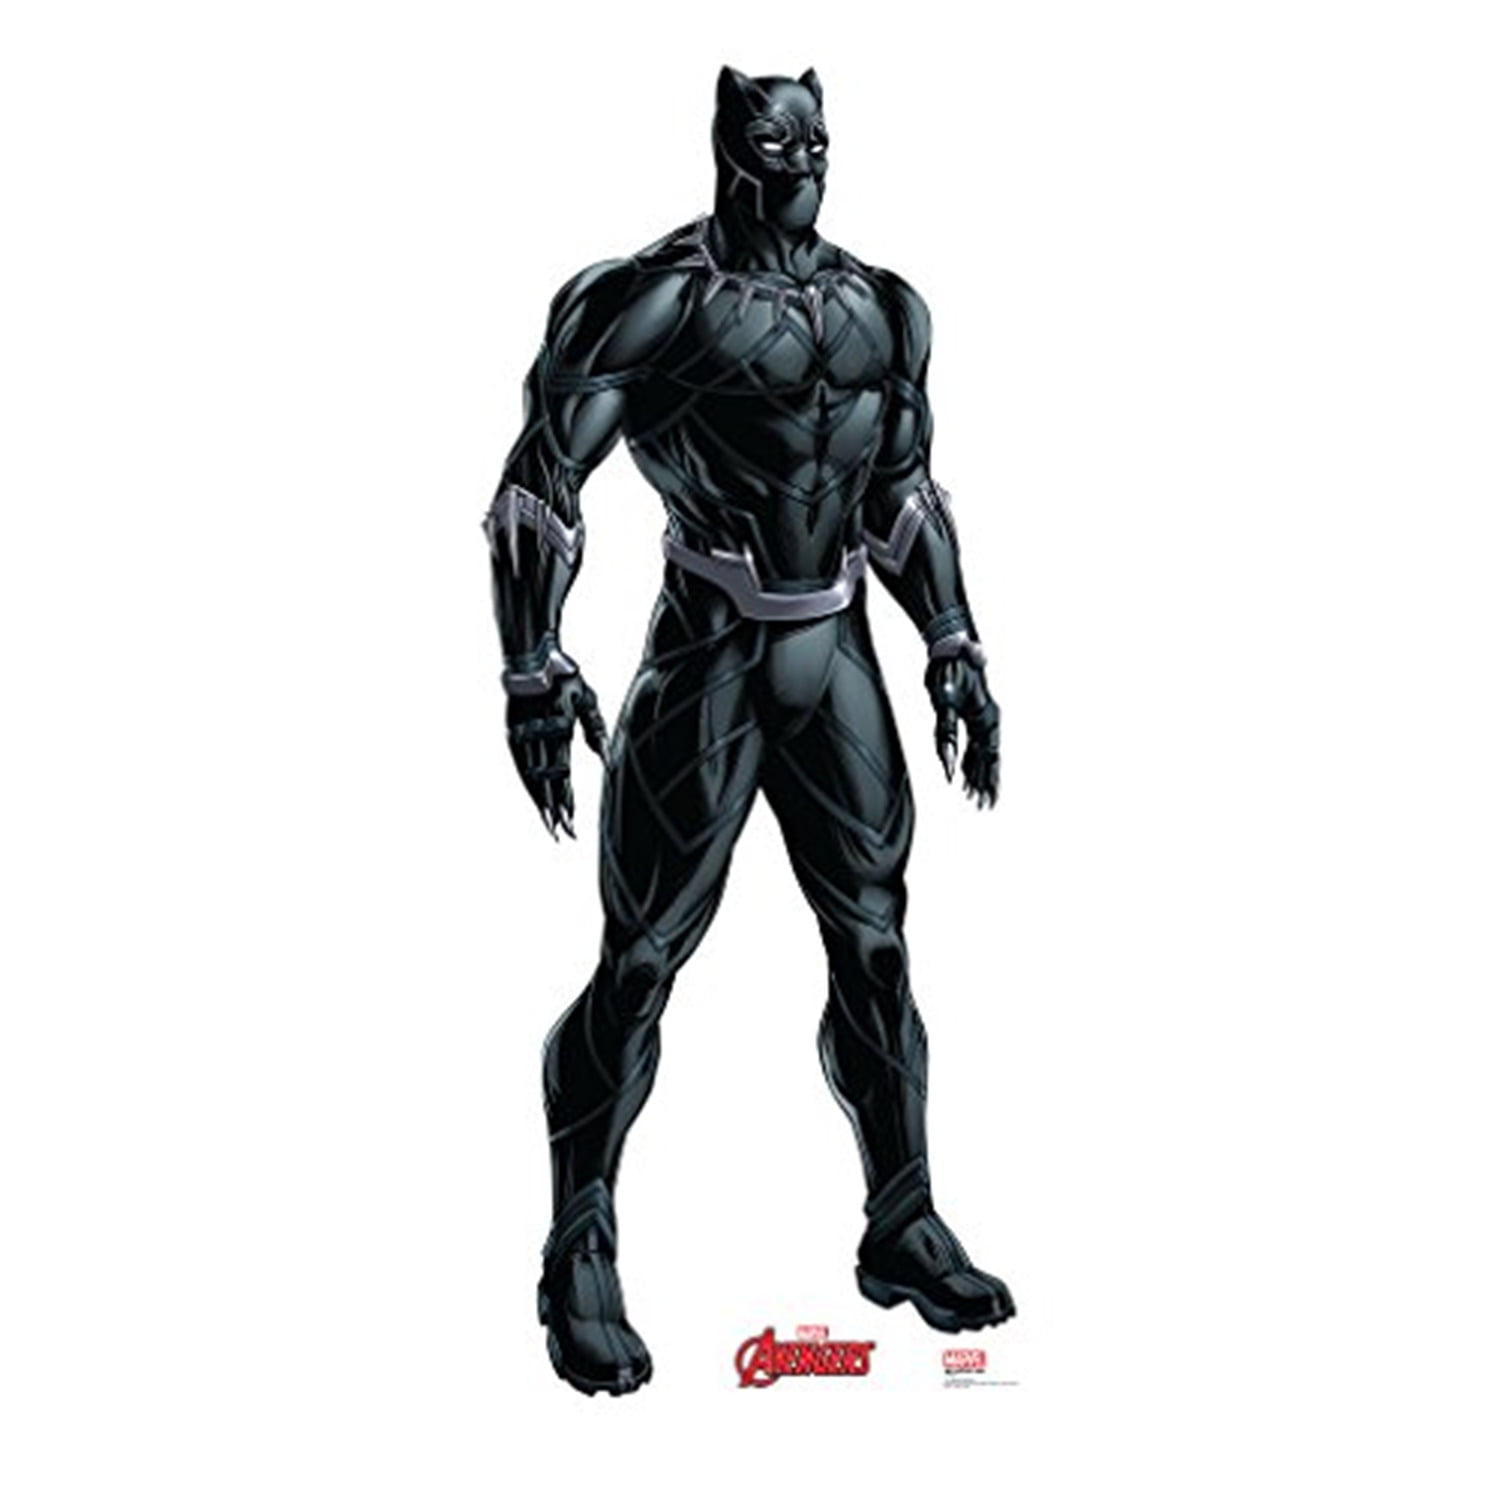 UPC 082033023270 product image for 2327 74 x 30 in. Black Panther - Avengers Animated Cardboard Standup | upcitemdb.com